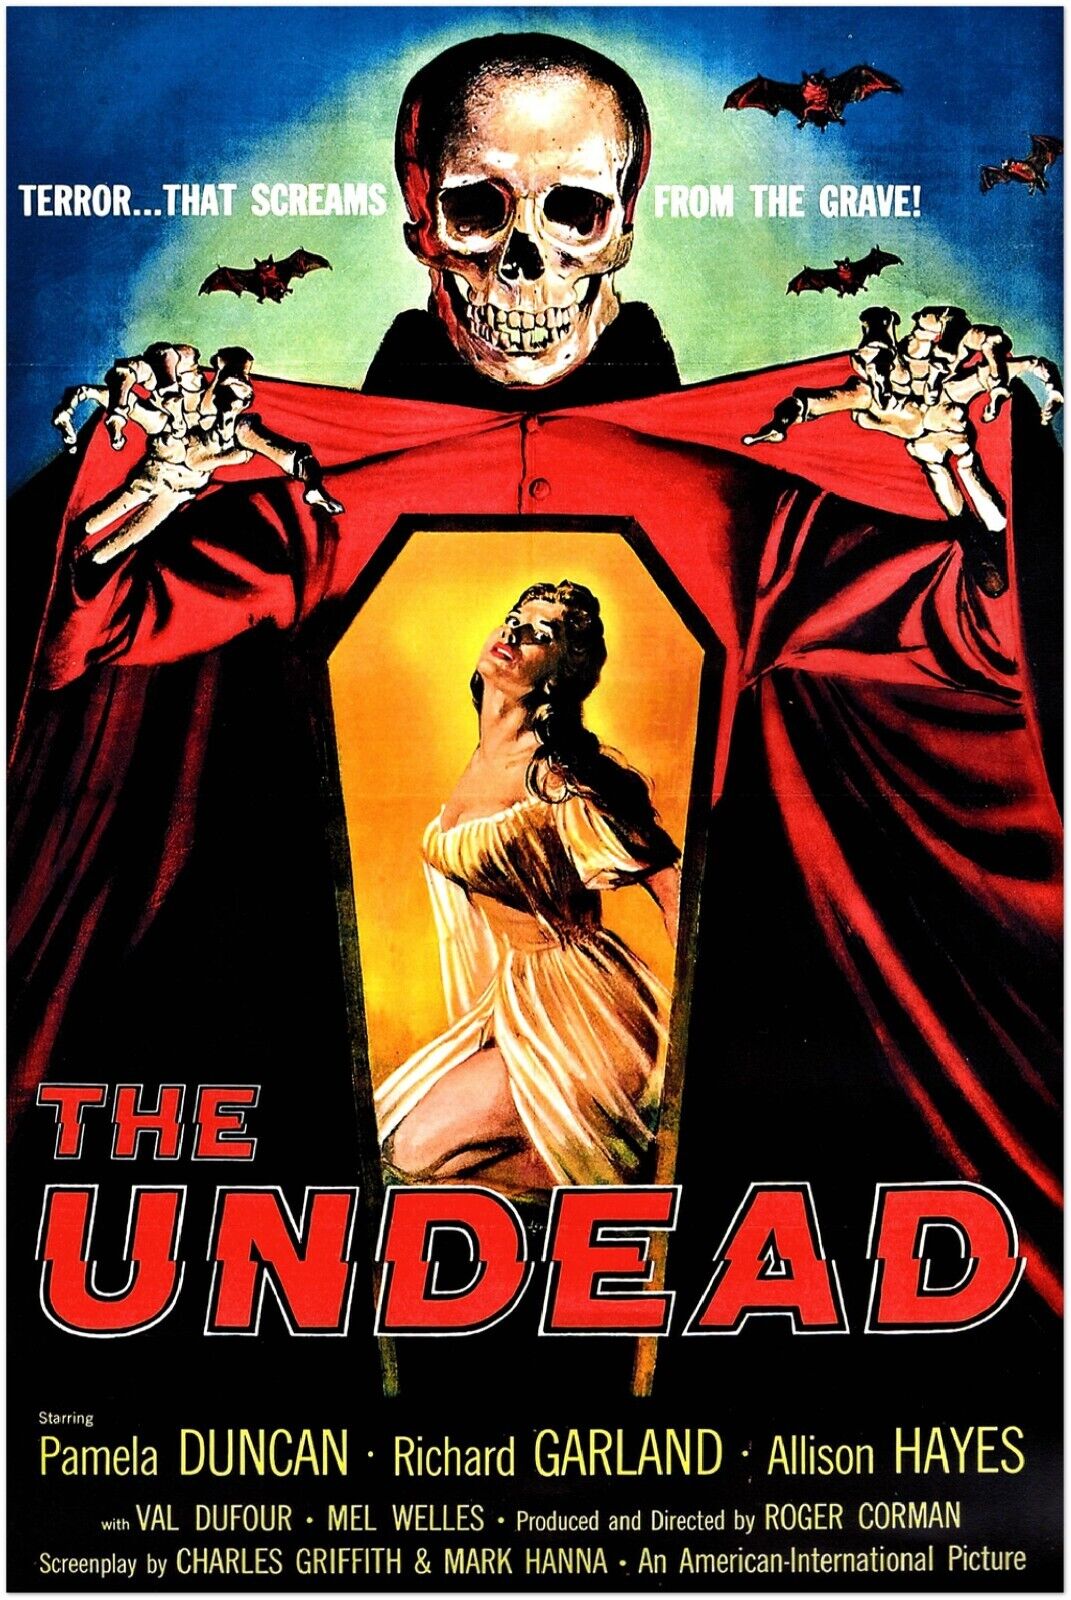 The Undead  - Vintage Horror Movie Poster